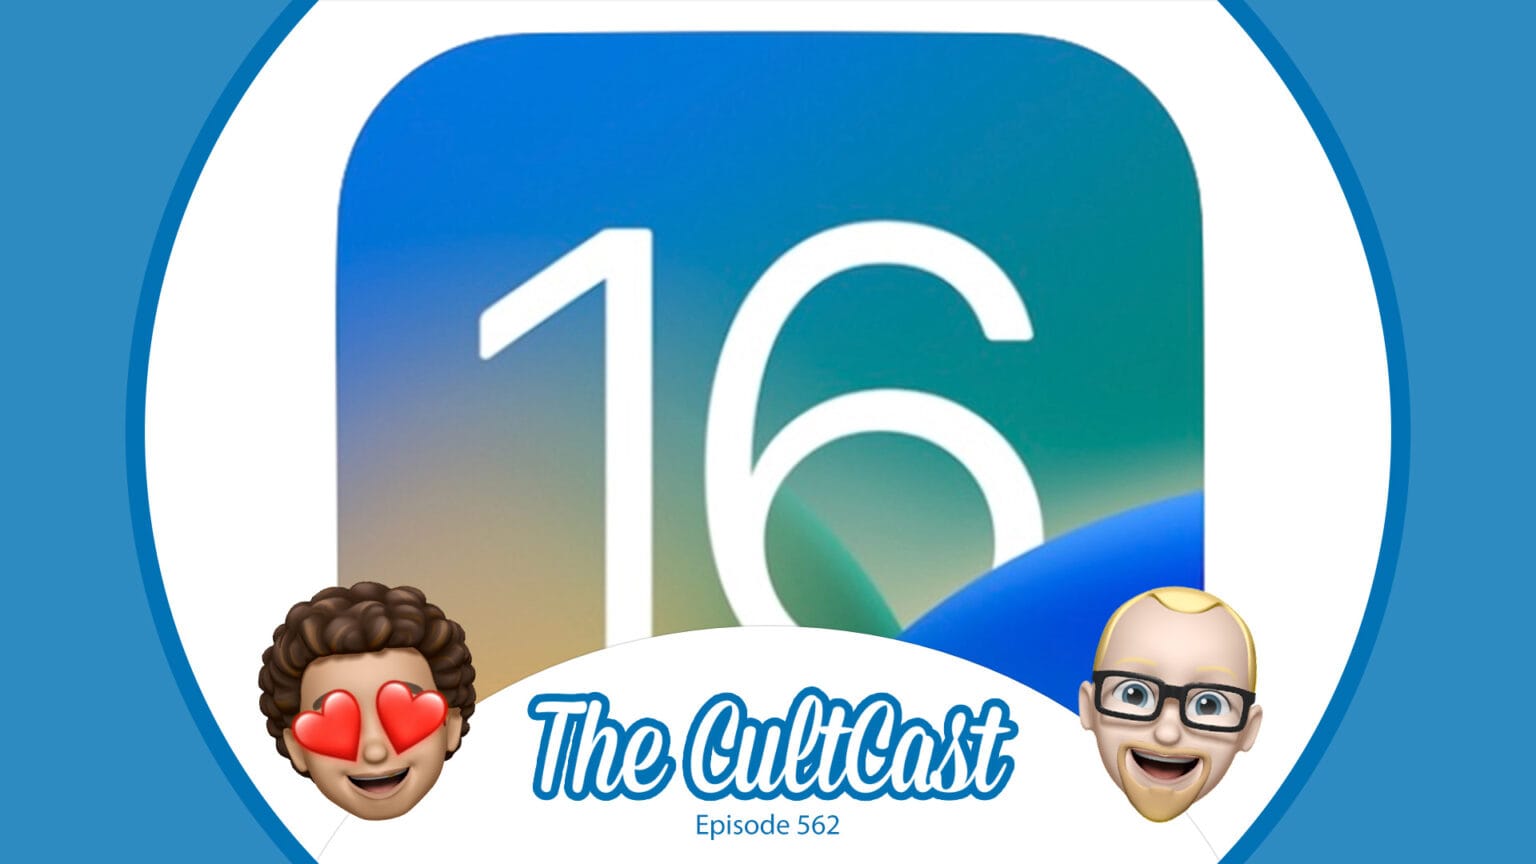 Hidden iOS 16 features make us love it even more - The CultCast Apple podcast